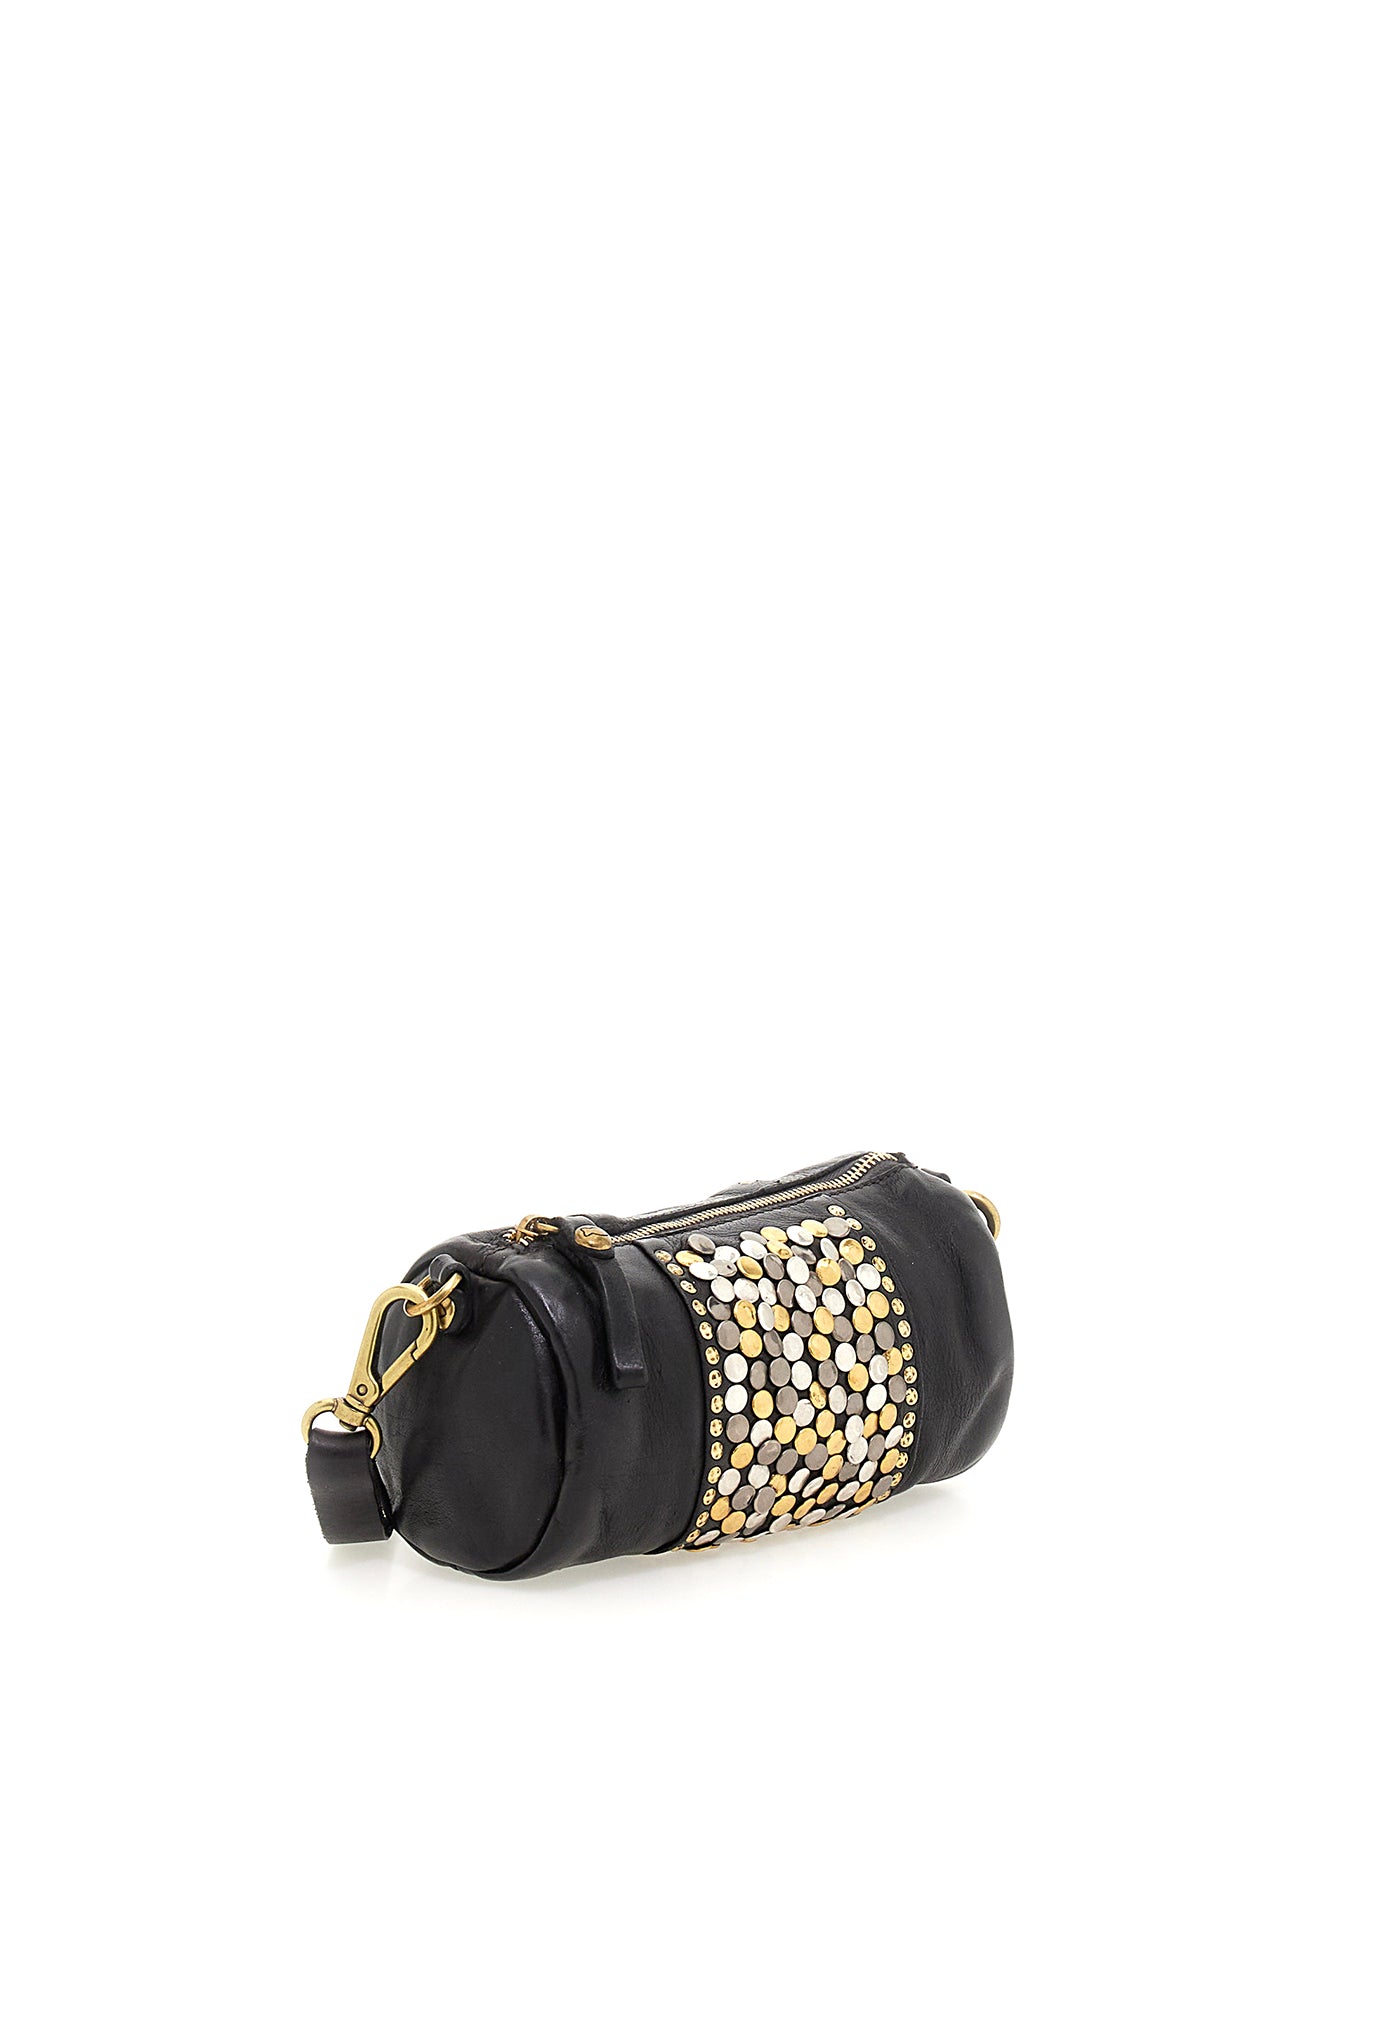 Mix Stud Small Crossbody Bag - Black sold by Angel Divine